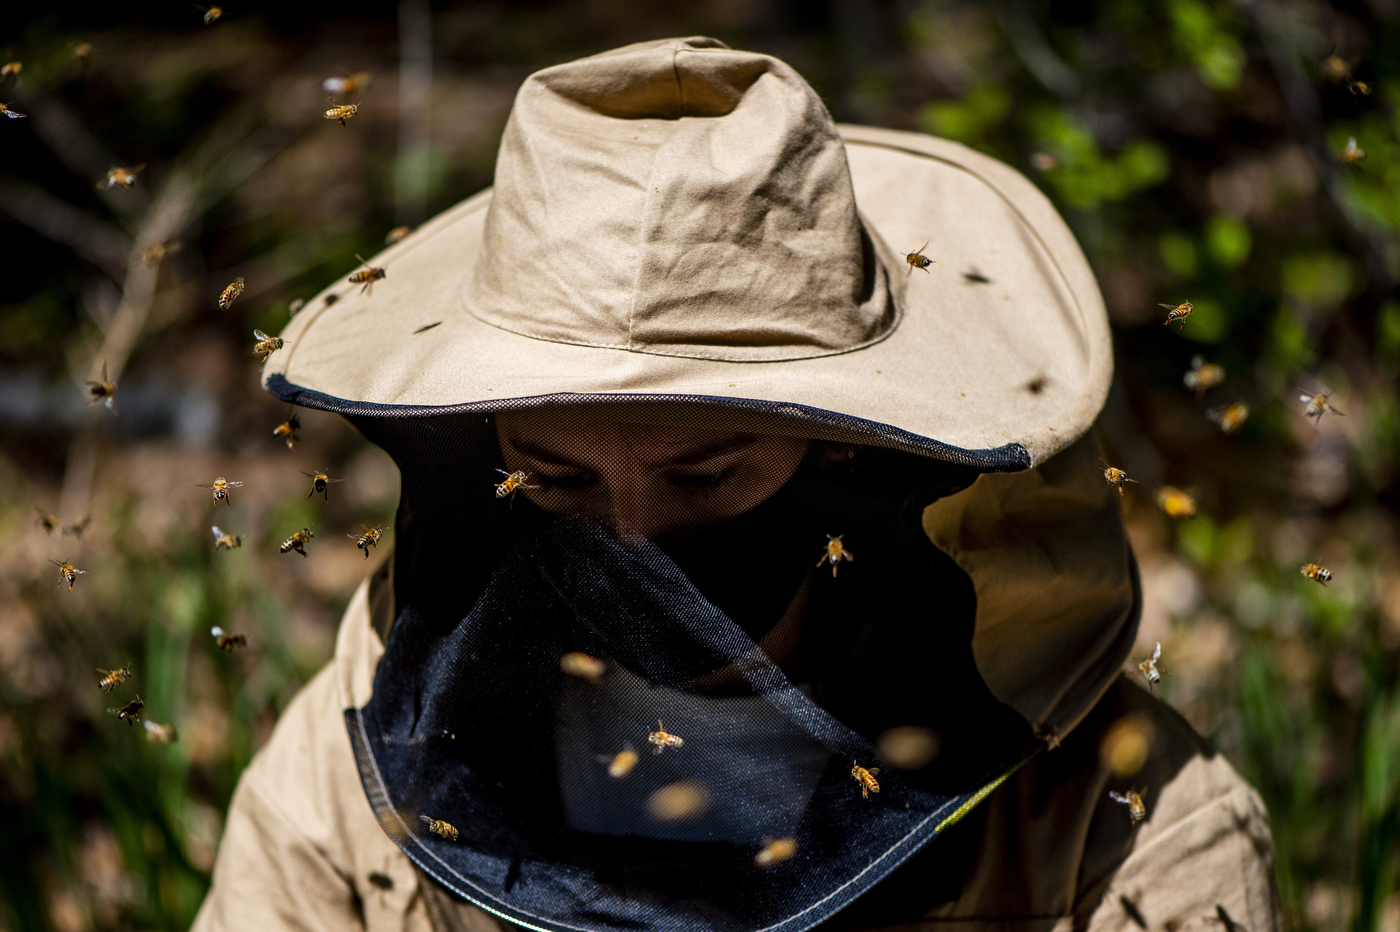 A student wearing a beekeeper hat and mesh surrounded by bees